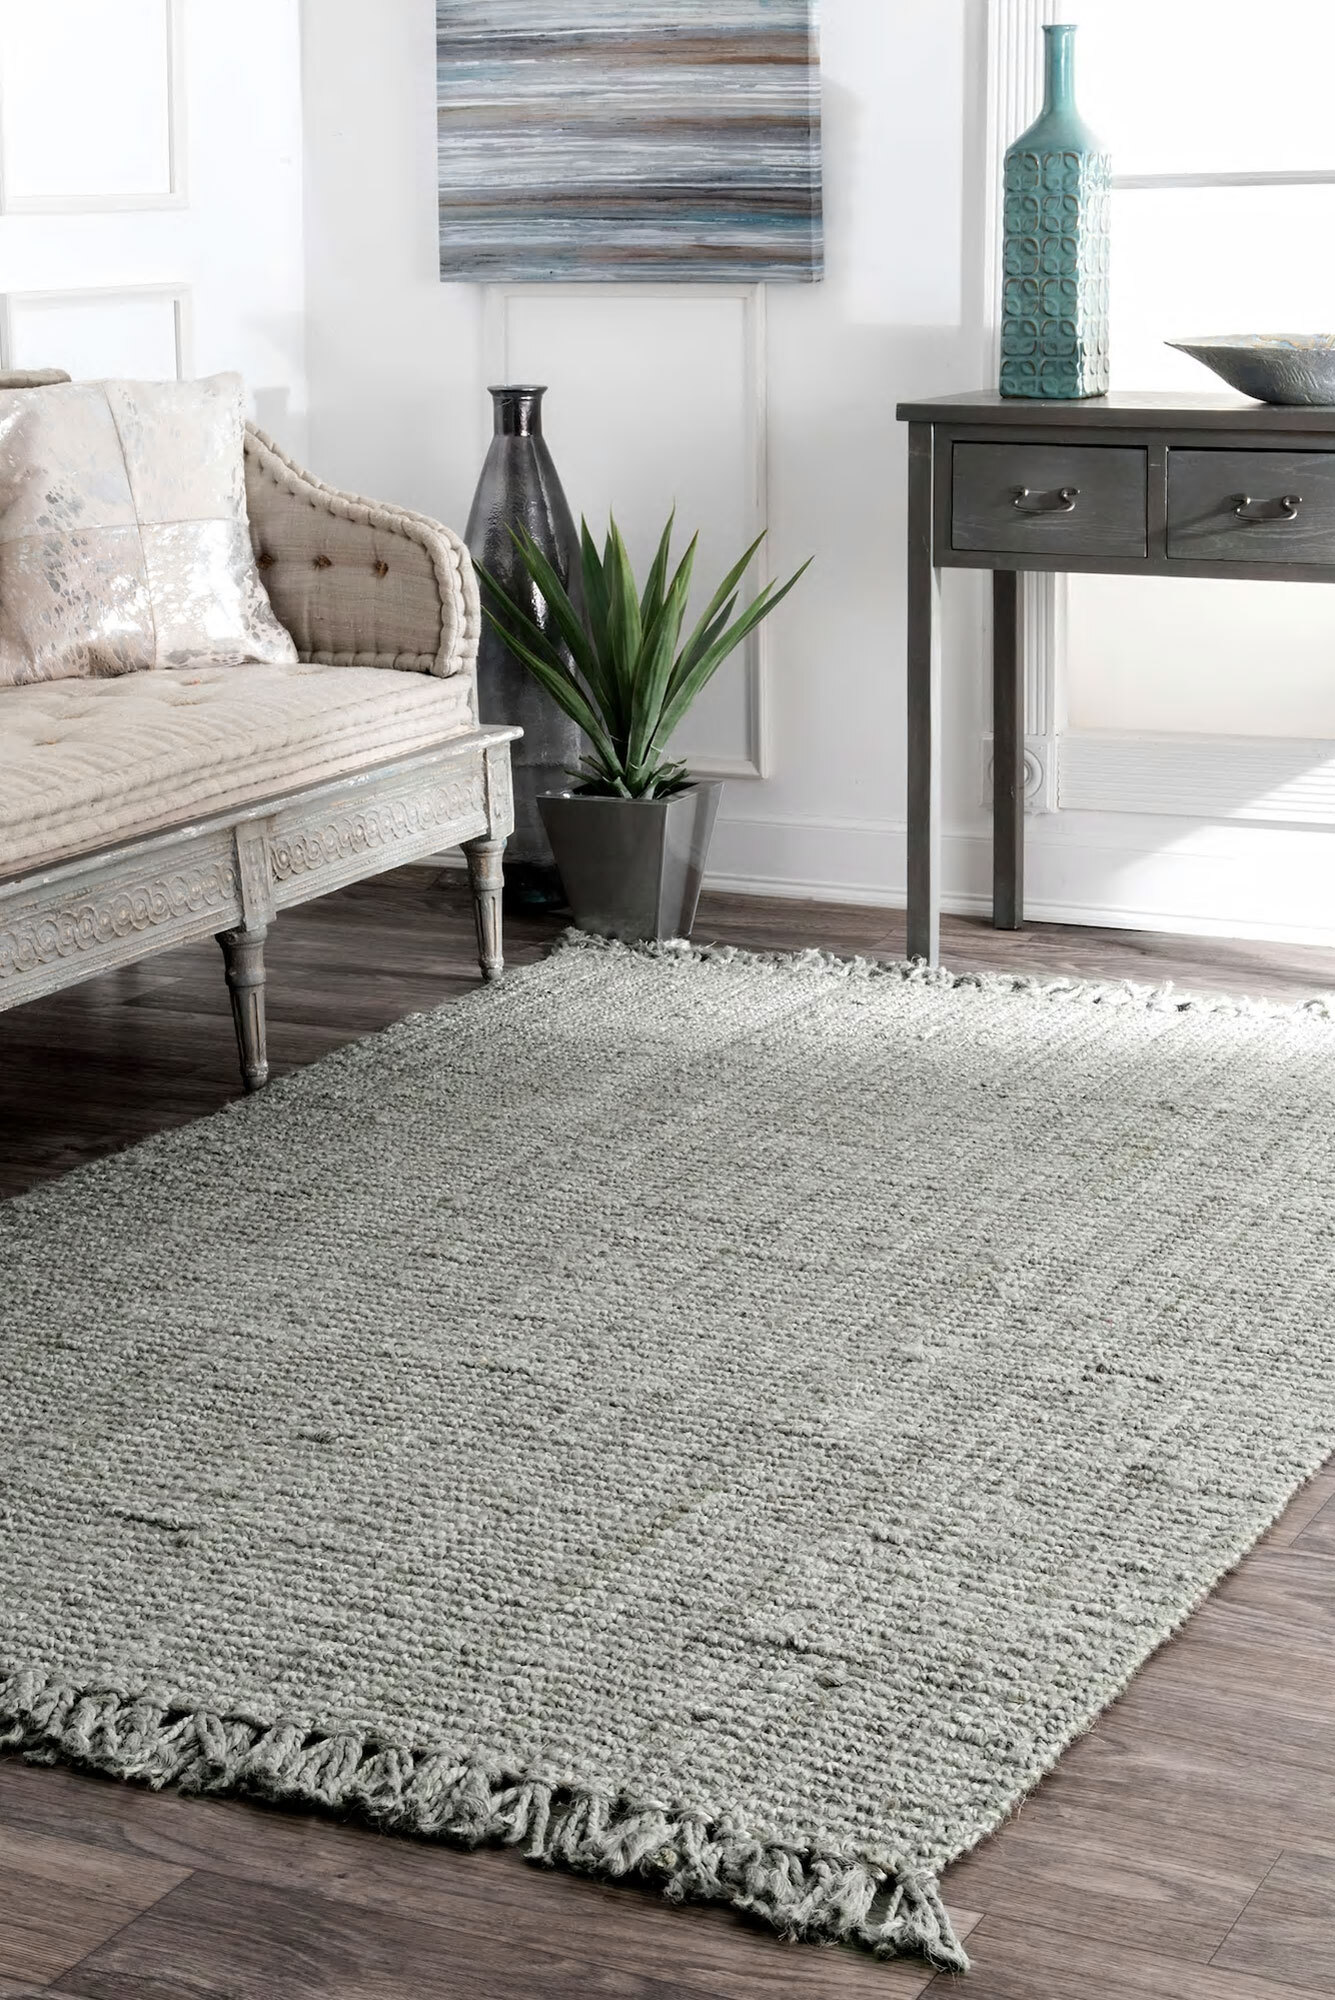 Dyed Jute Grey Hand Woven Rug(Size 214 x 150cm)